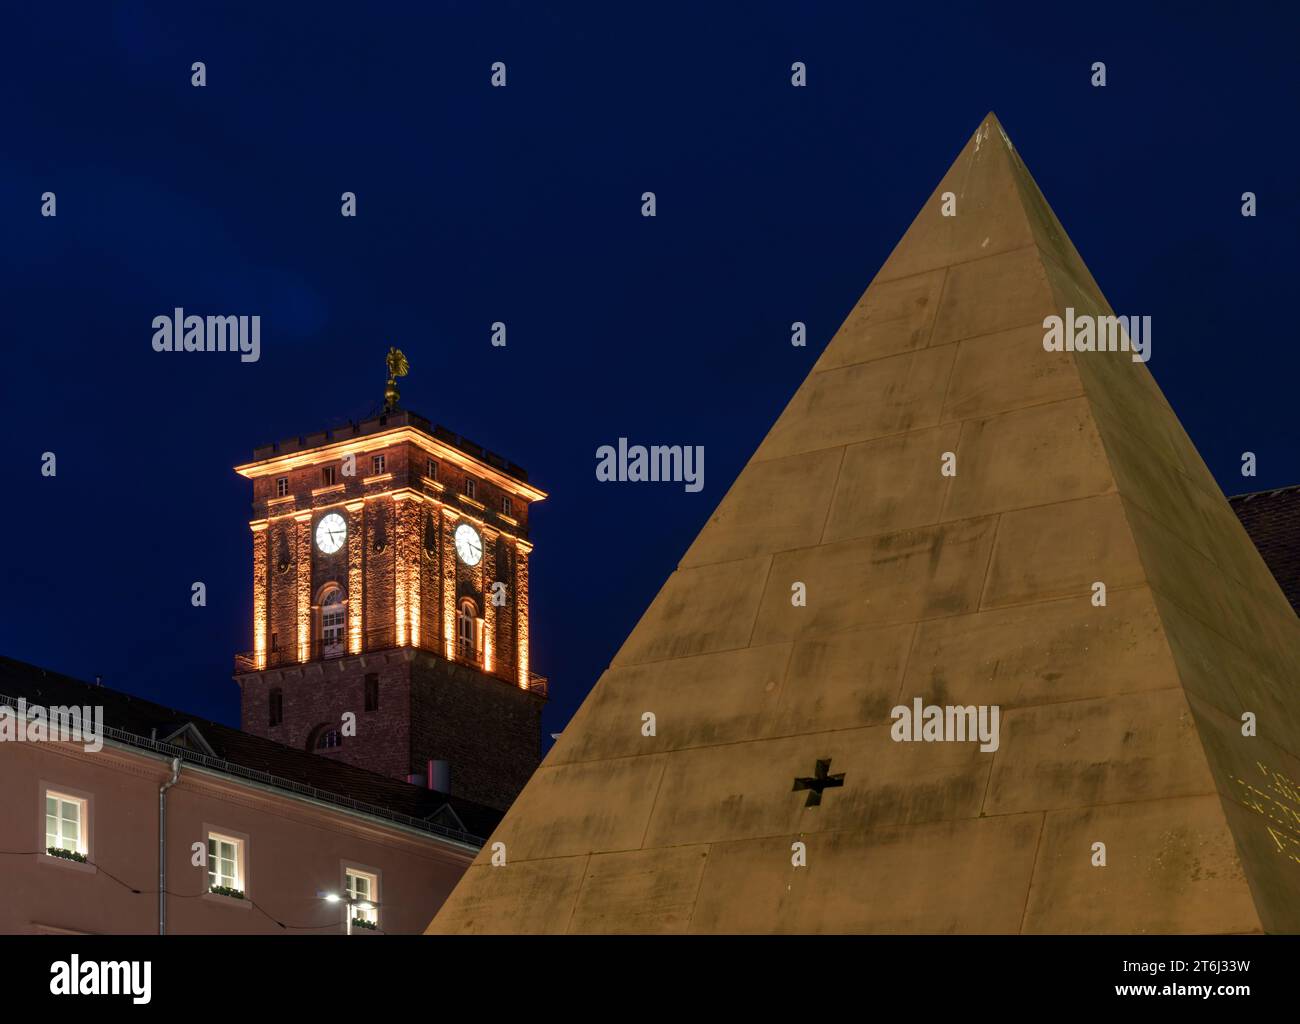 Germany, Baden-Wuerttemberg, Karlsruhe, the pyramid with the town hall tower. Stock Photo